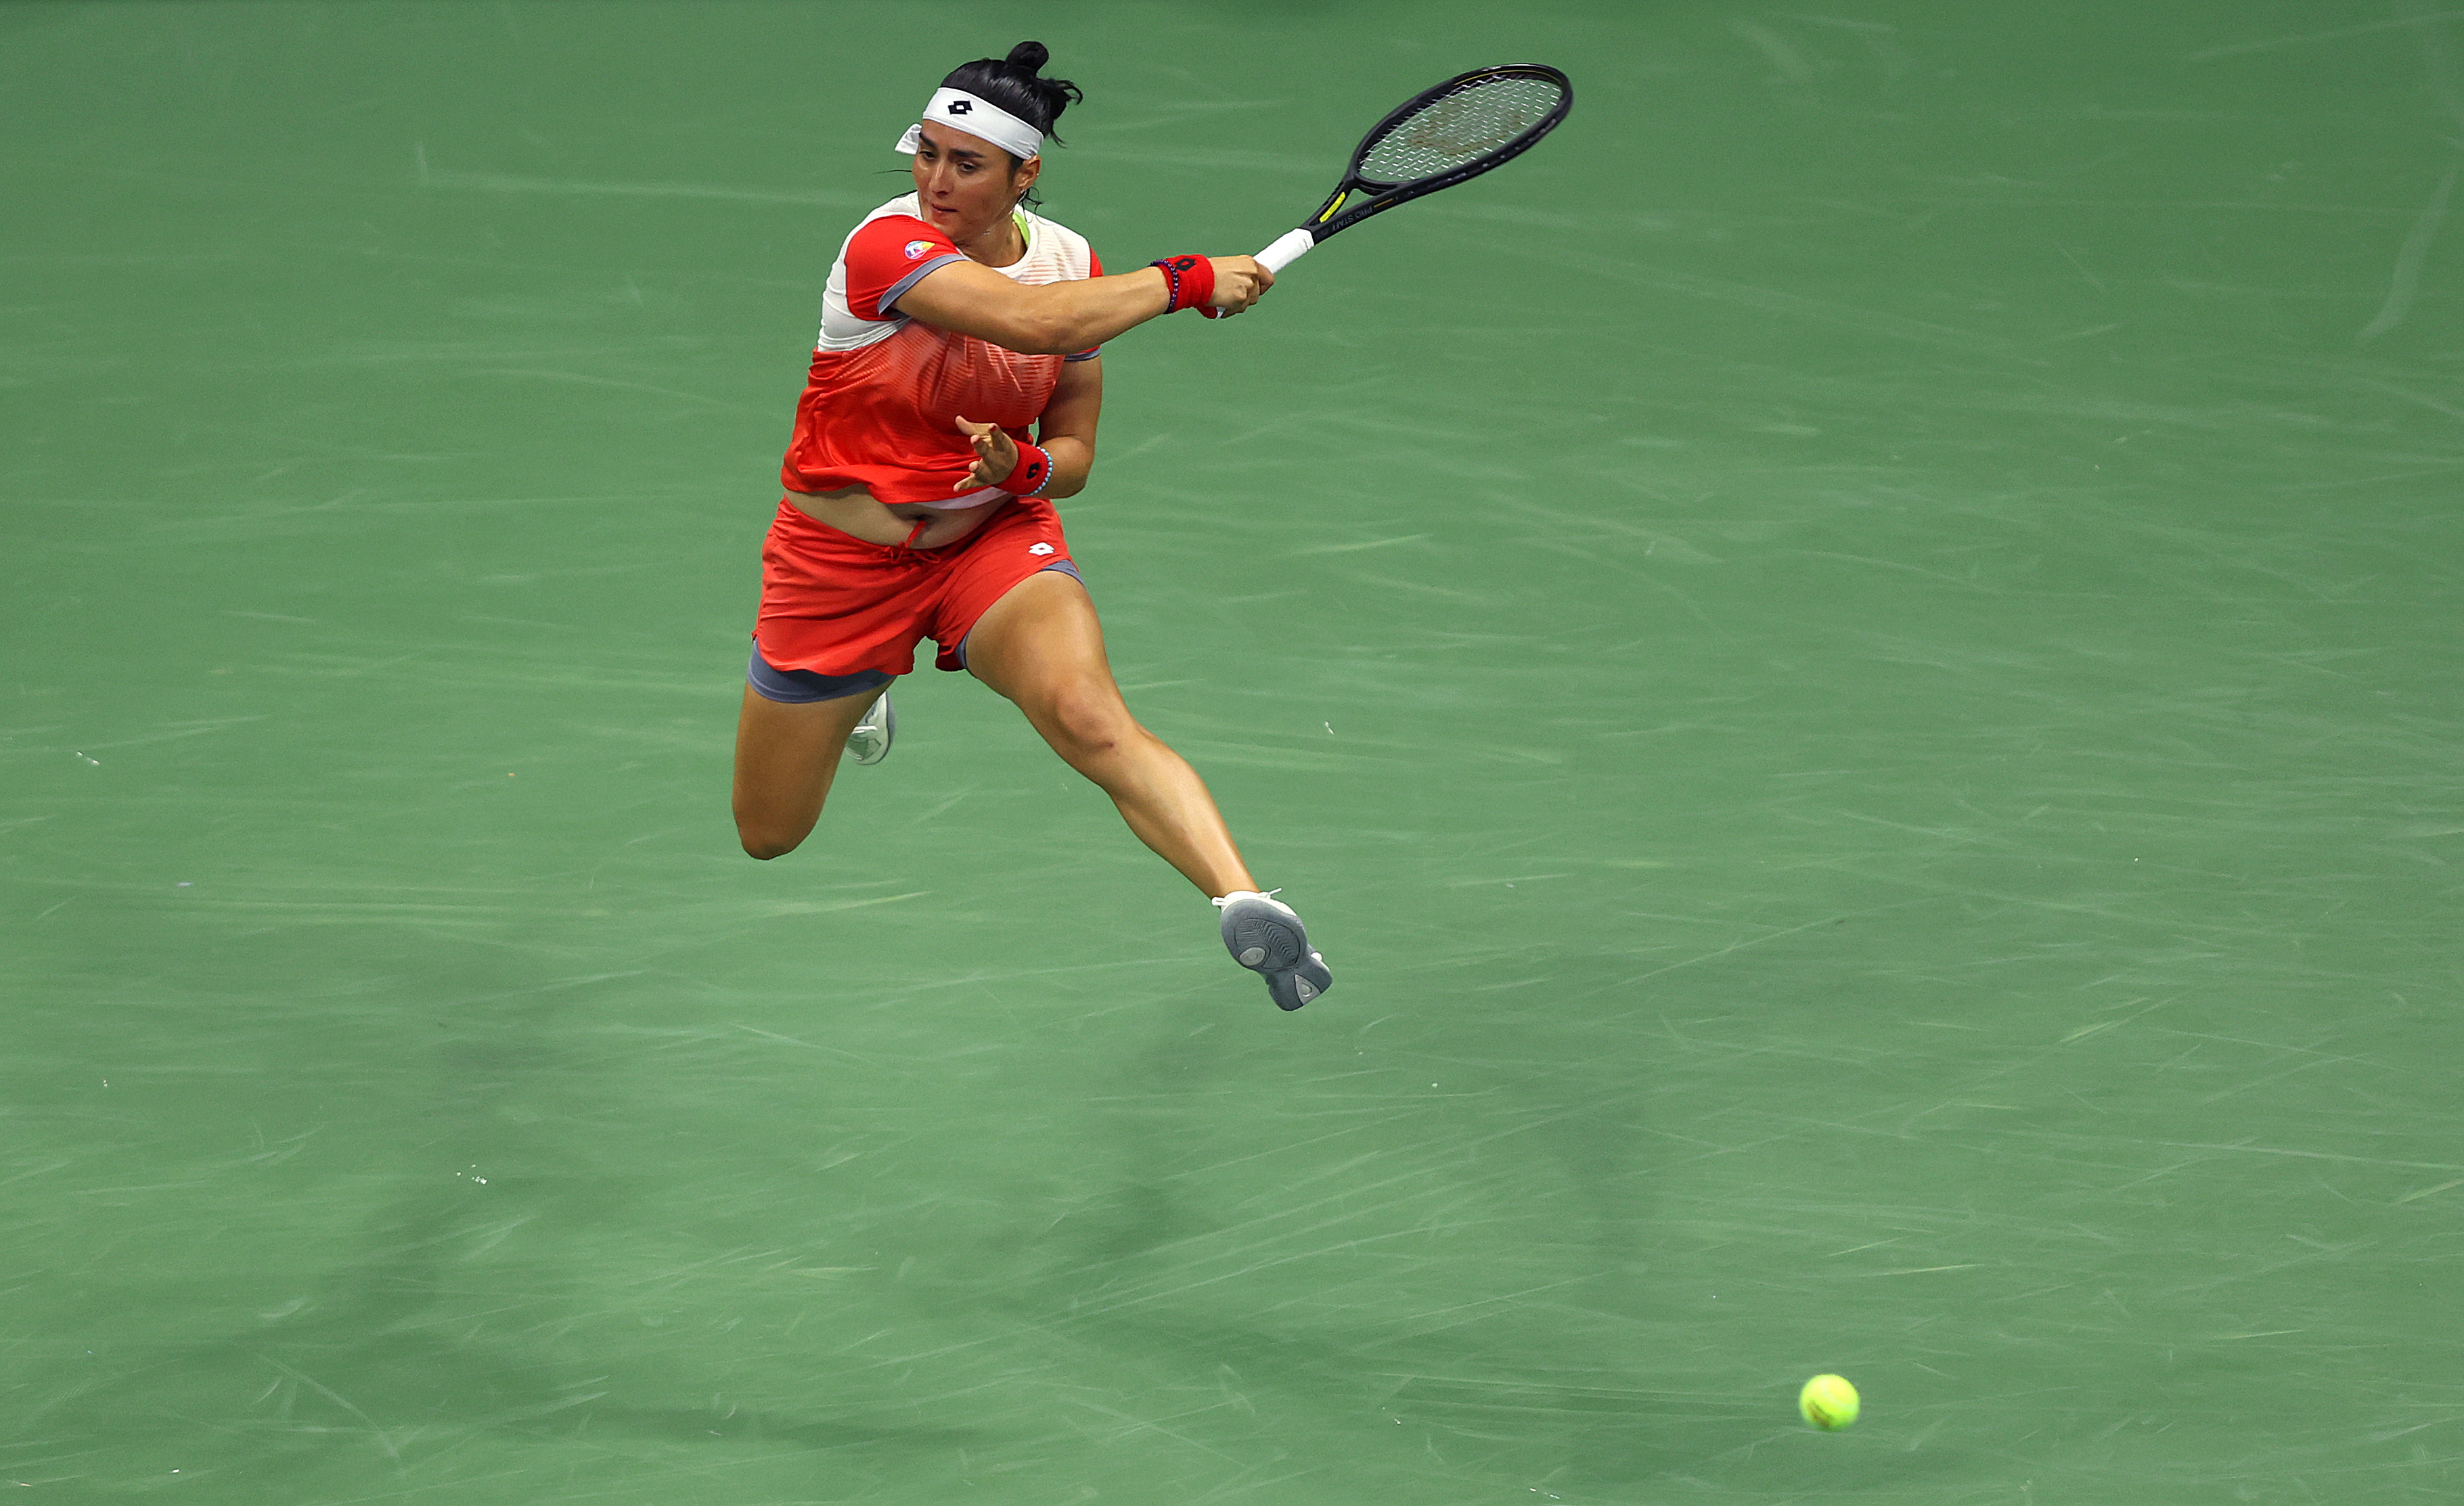 Ons Jabeur of Tunisia returns the ball with a flying forehand against Veronika Kudermetova during their Women’s Singles Fourth Round match on Day Seven of the 2022 US Open at USTA Billie Jean King National Tennis Center on September 04, 2022 in the Flushing neighborhood of the Queens borough of New York City.